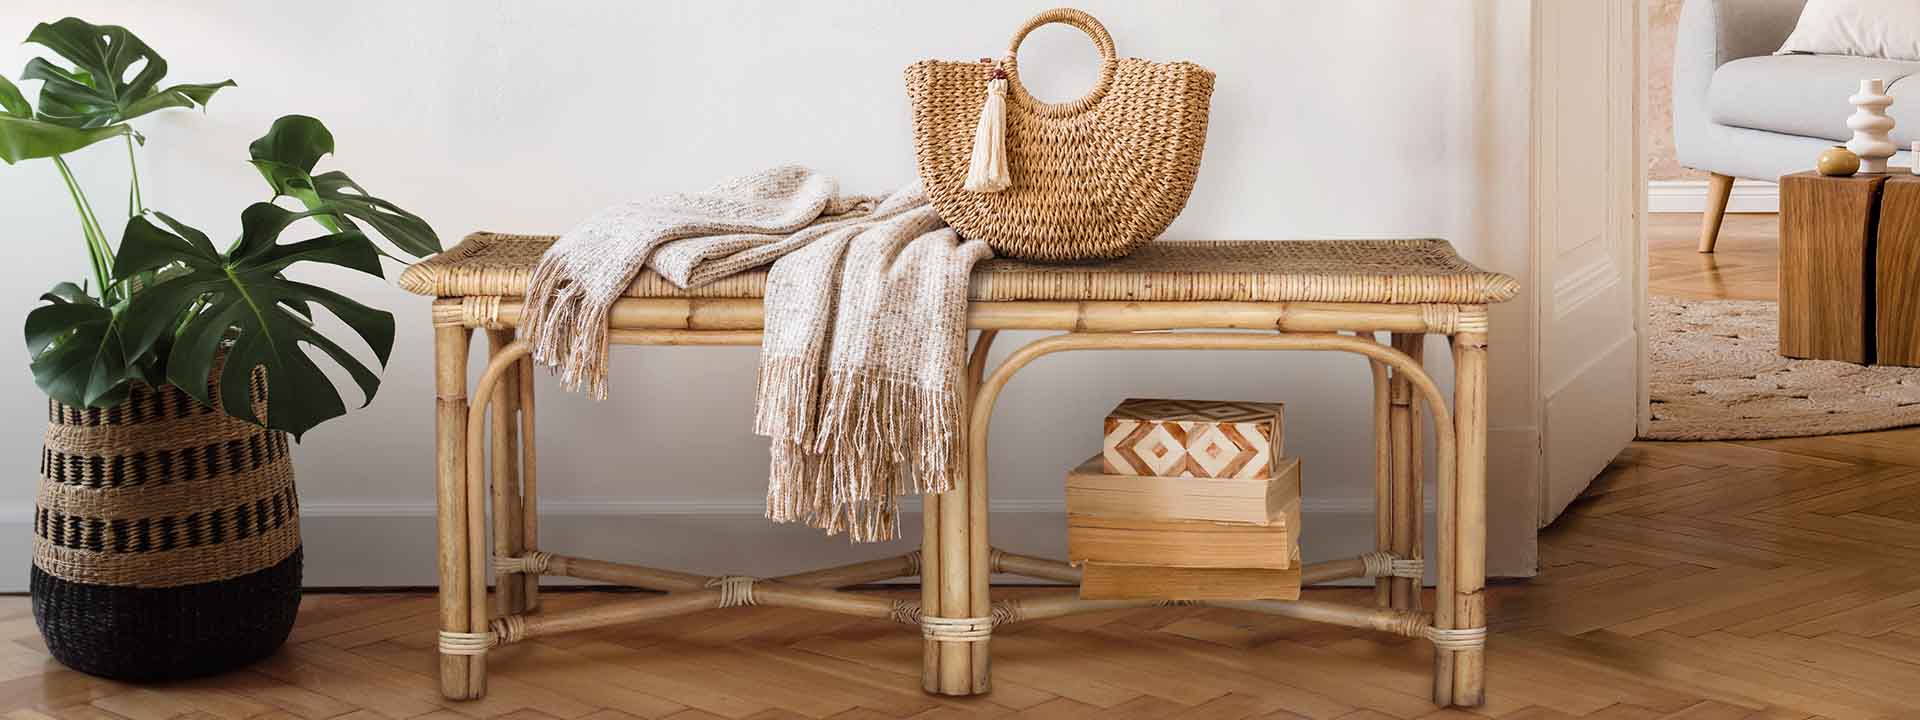 Sustainable elegance: ideas for decorating with rattan at home